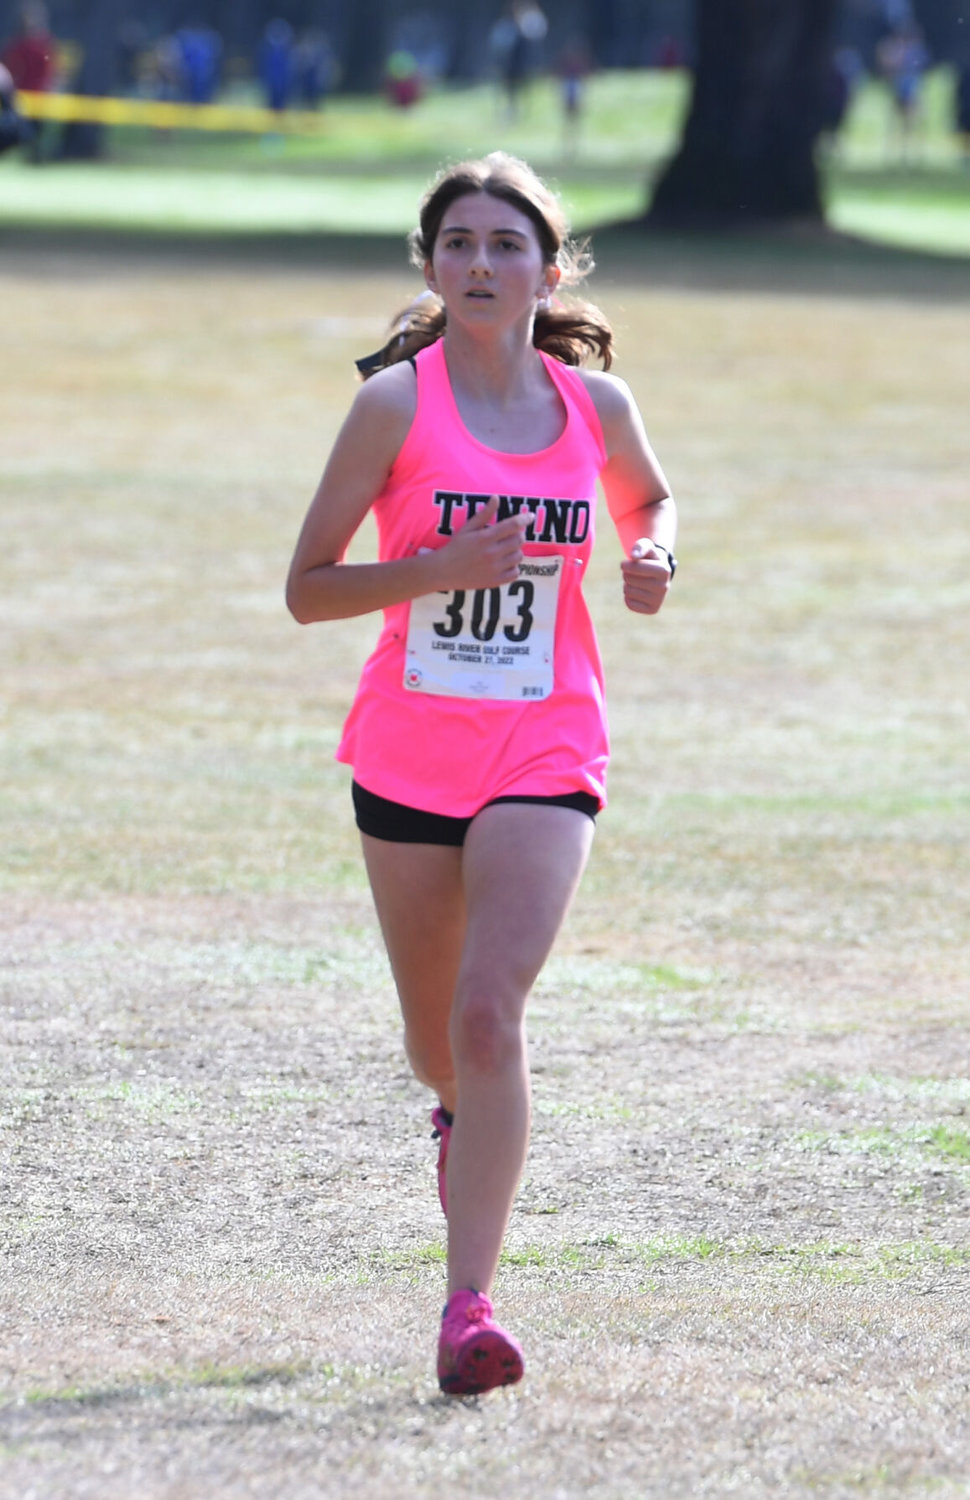 Tenino distance runner Haley Huber crosses the finish line at the 1A District 4 Cross Country Championships Oct. 27 at Lewis River in Woodland.